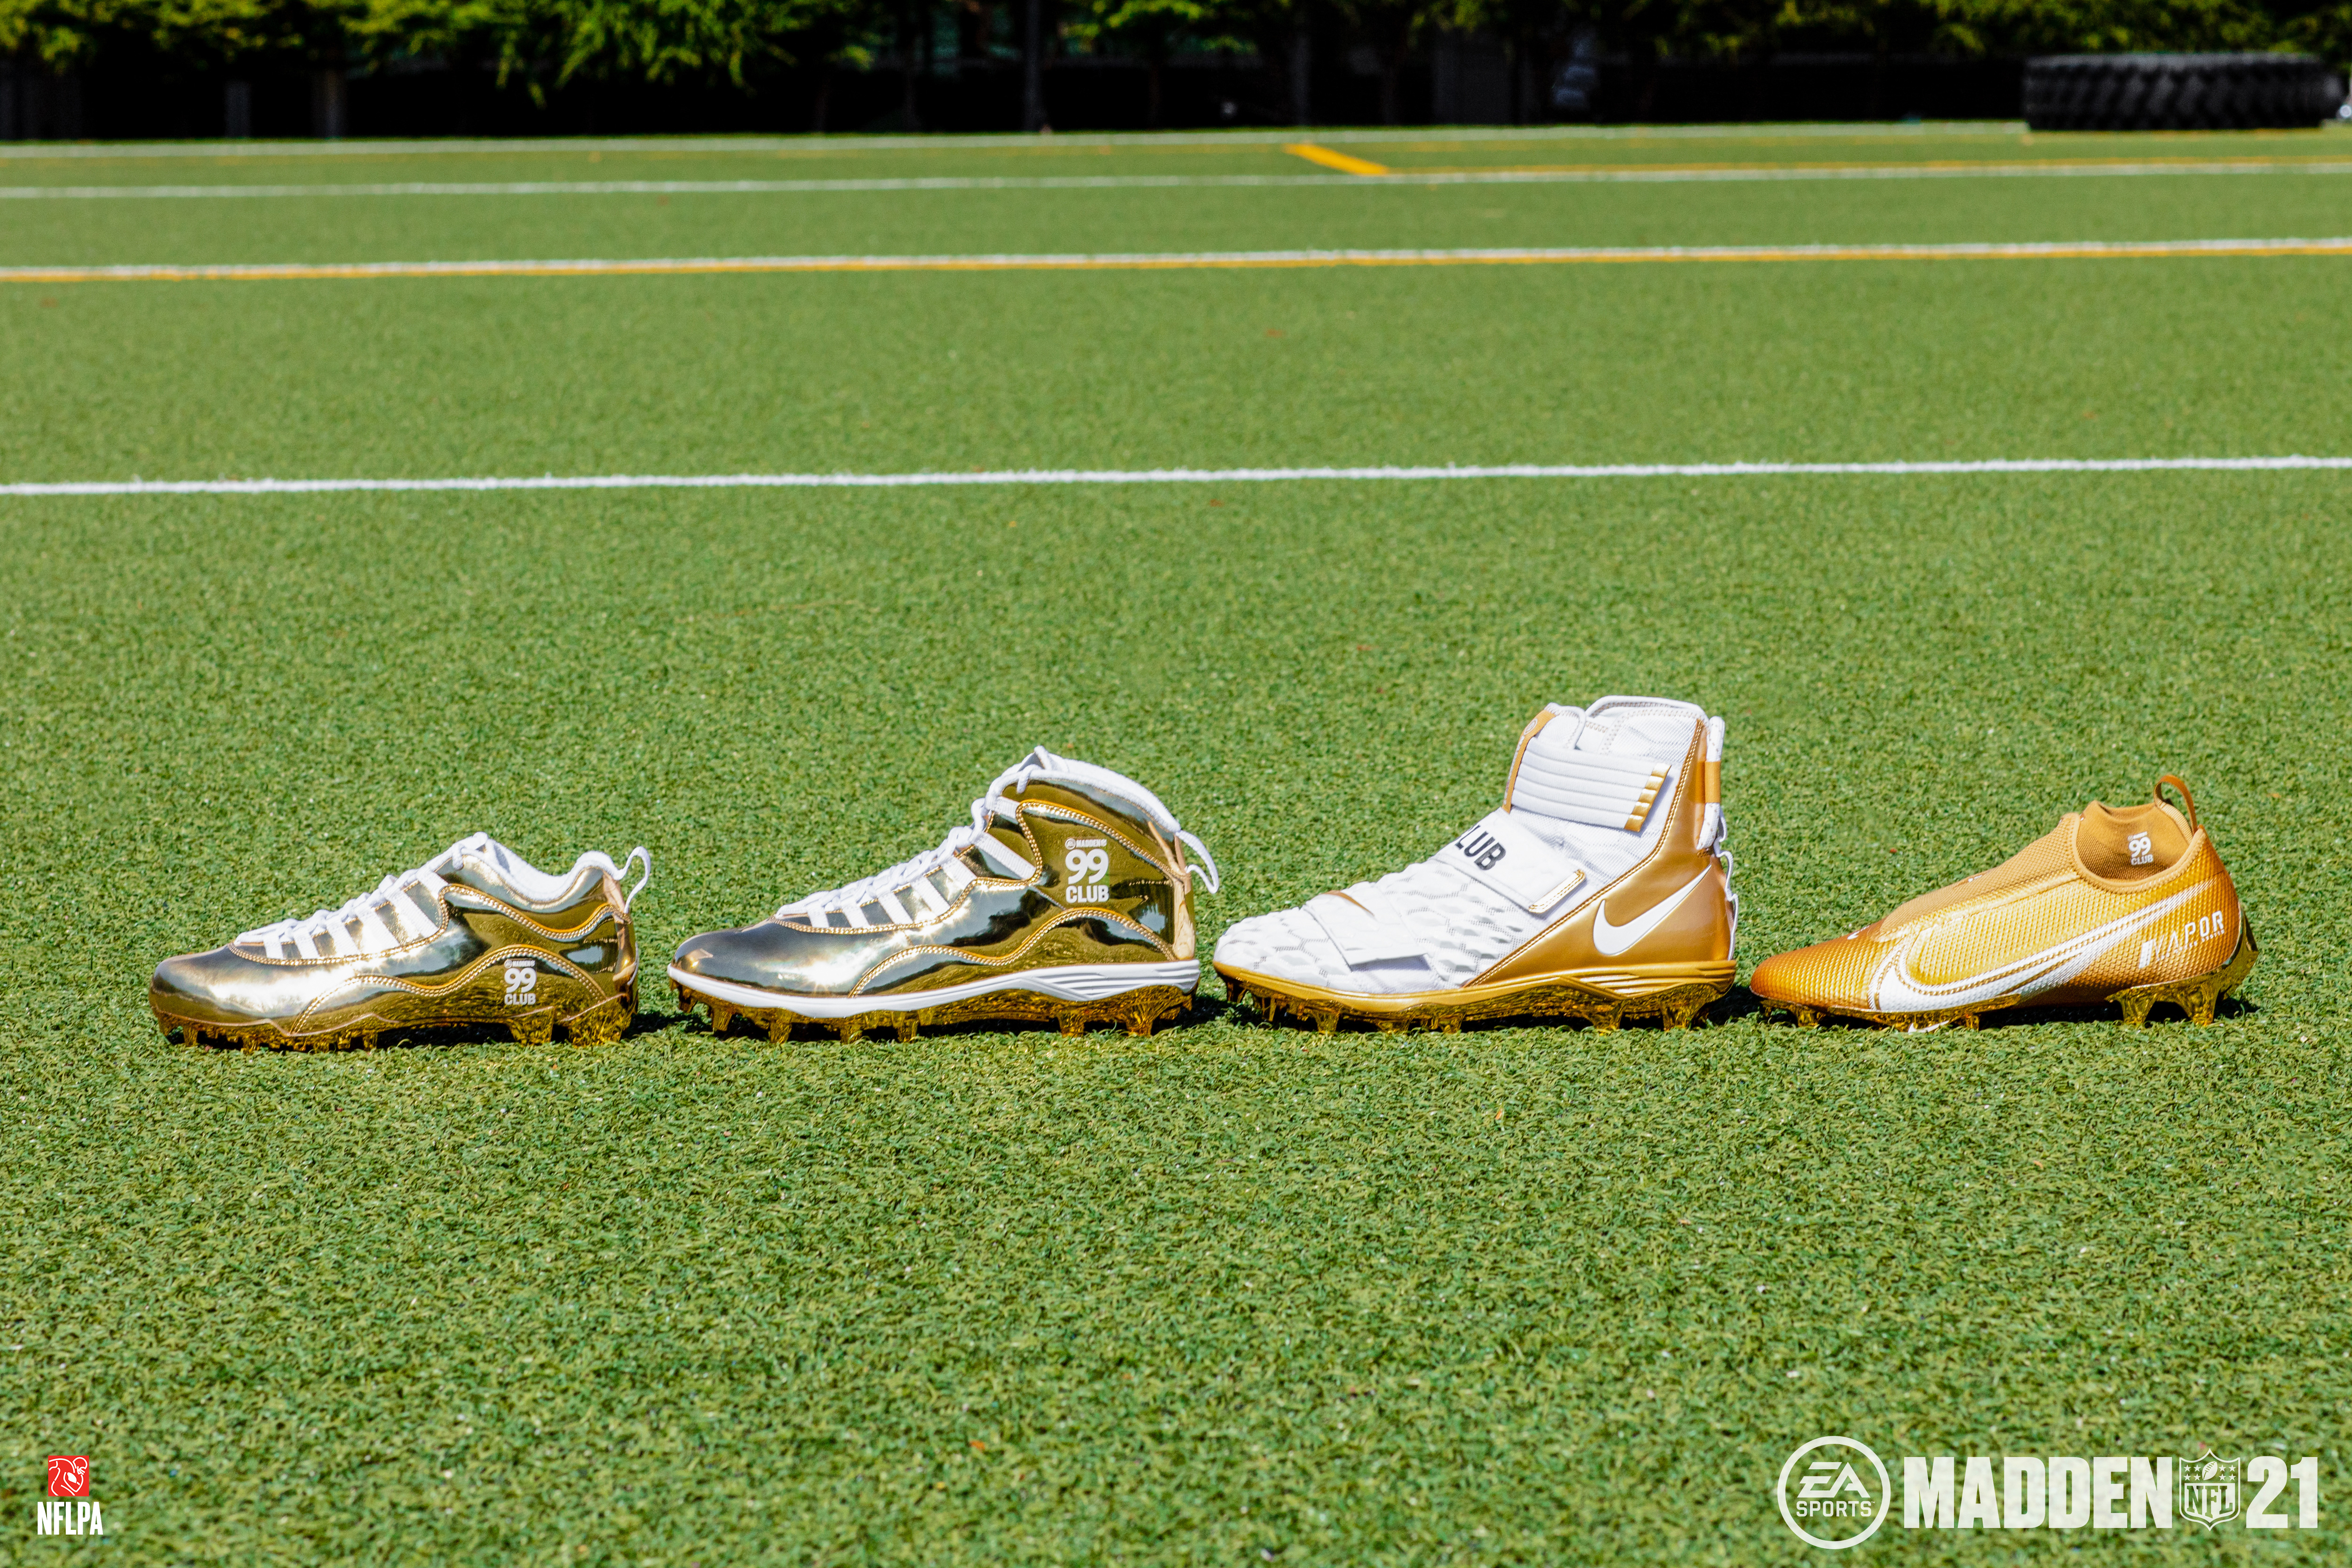 Madden 2021 99 Club Cleats